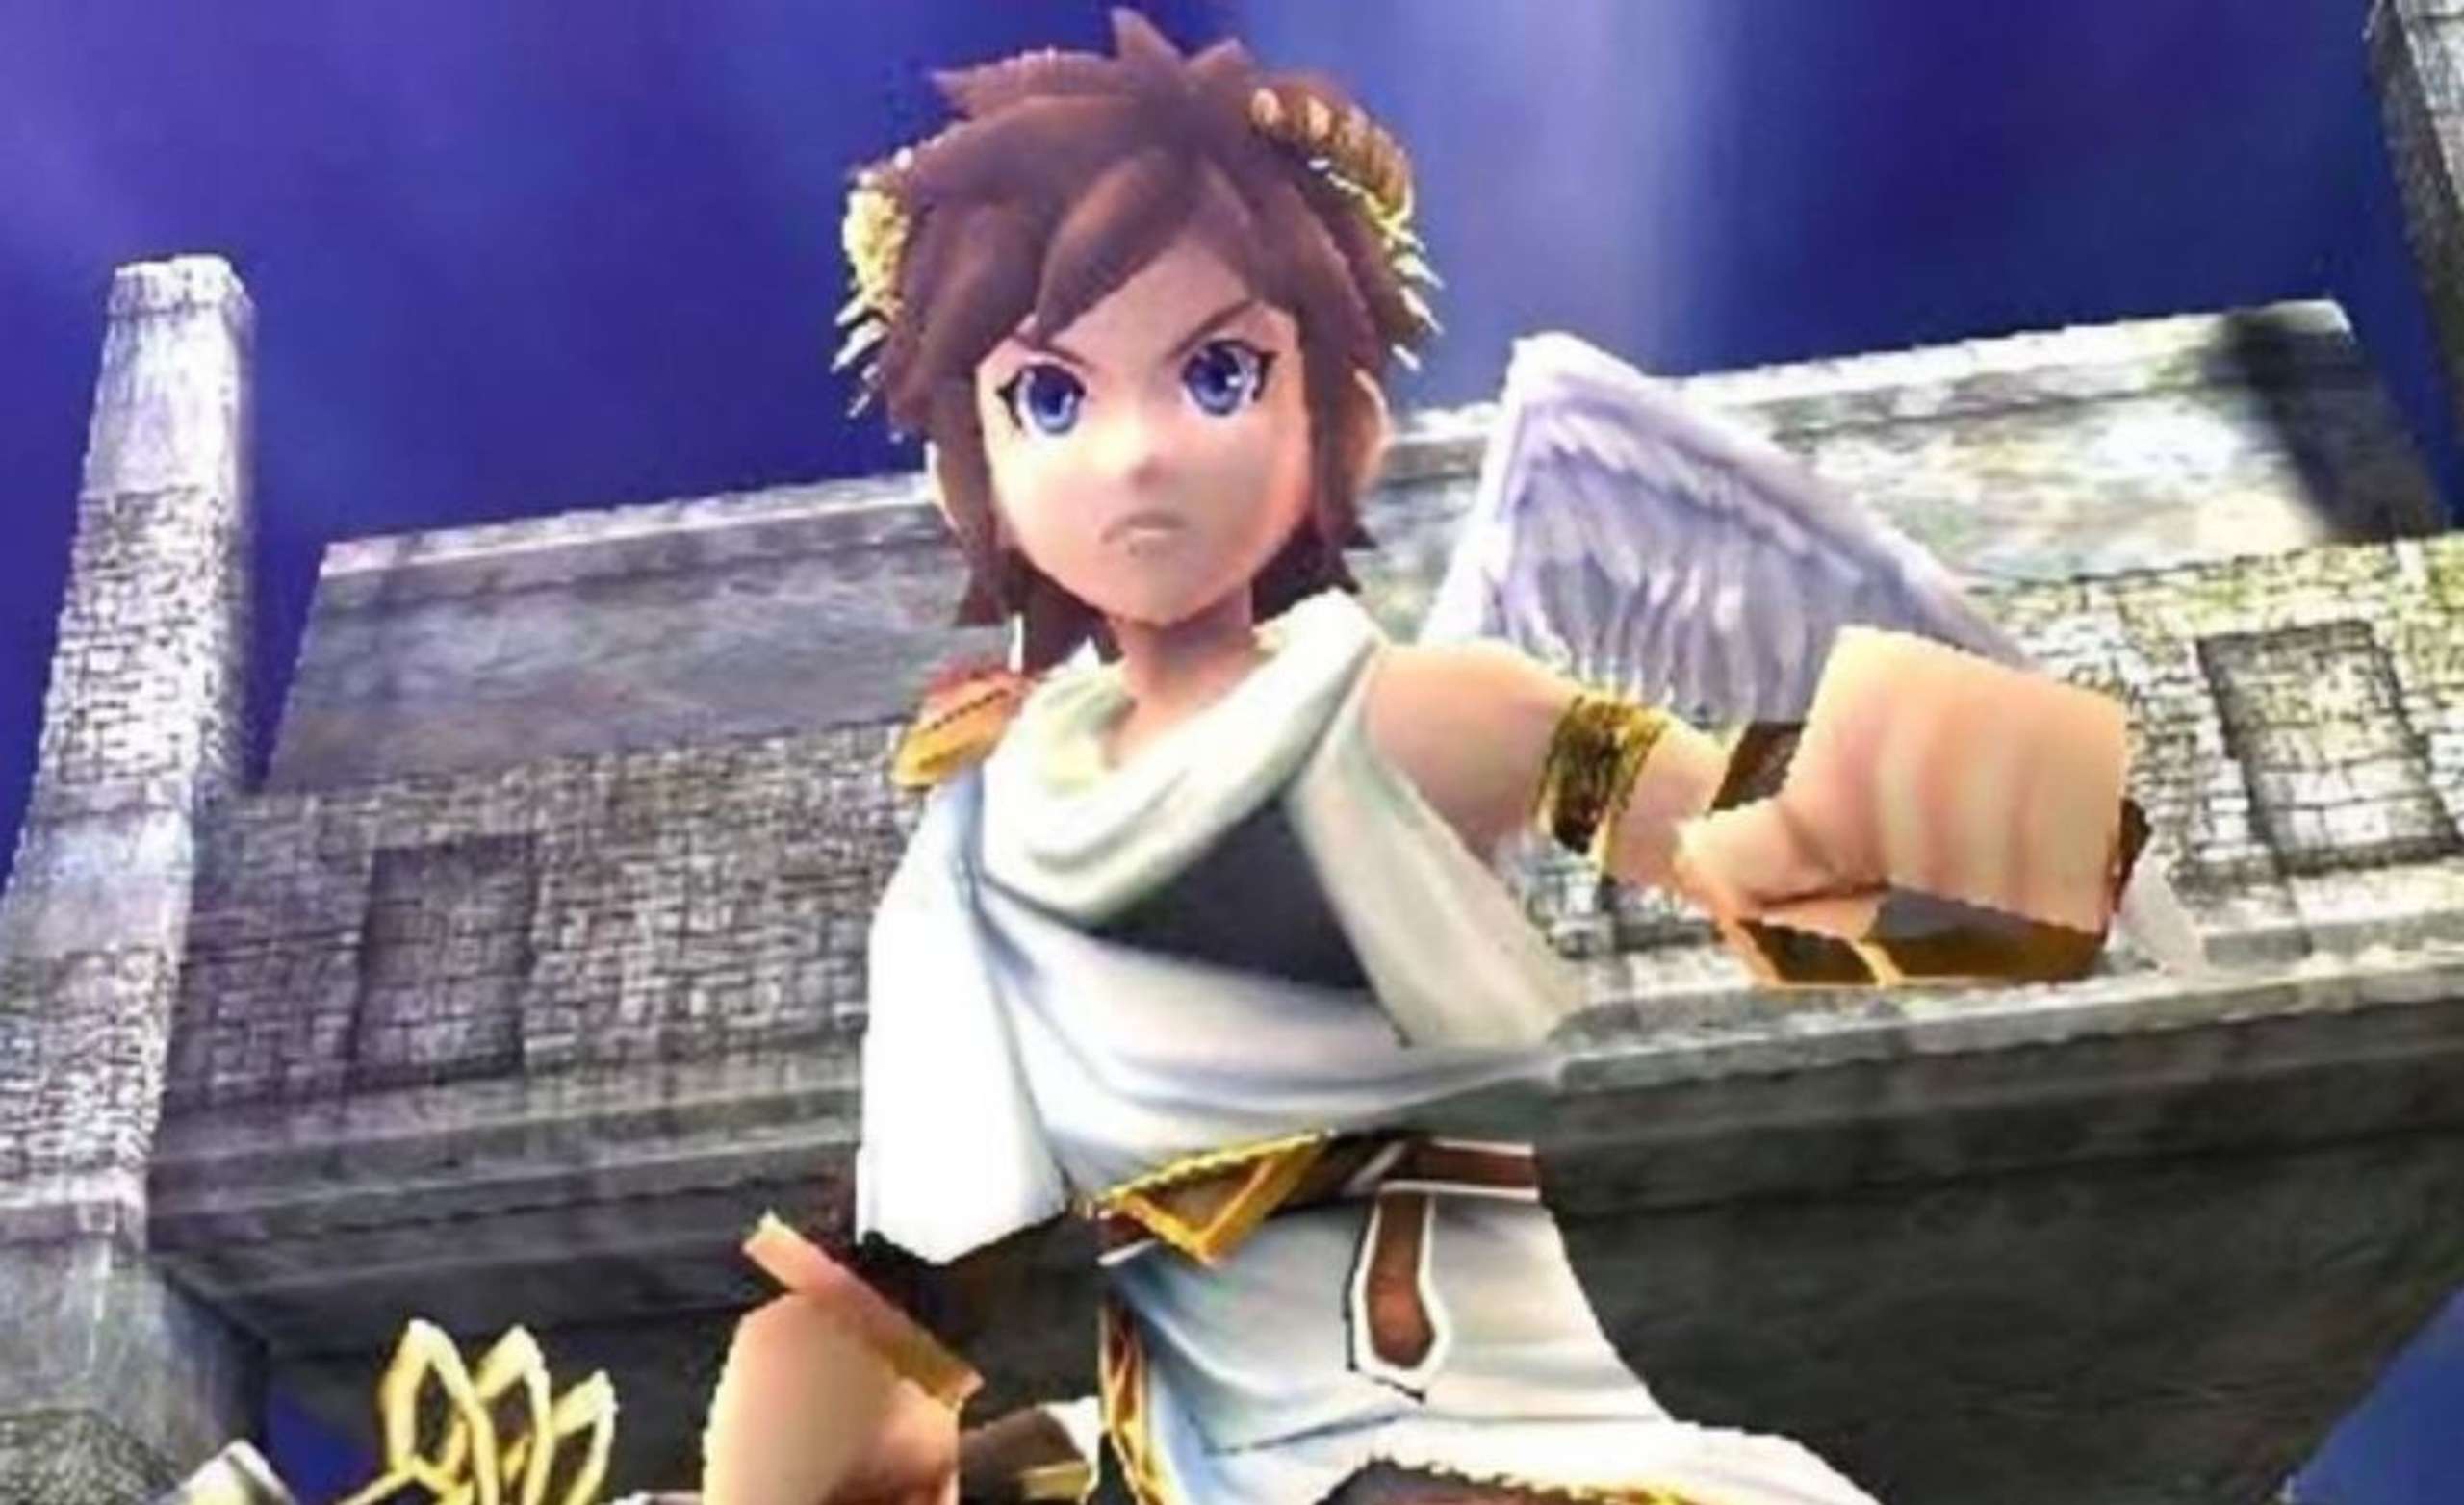 Nintendo Switch Remaster Of Kid Icarus: Uprising Is In The Works, According To Rumor